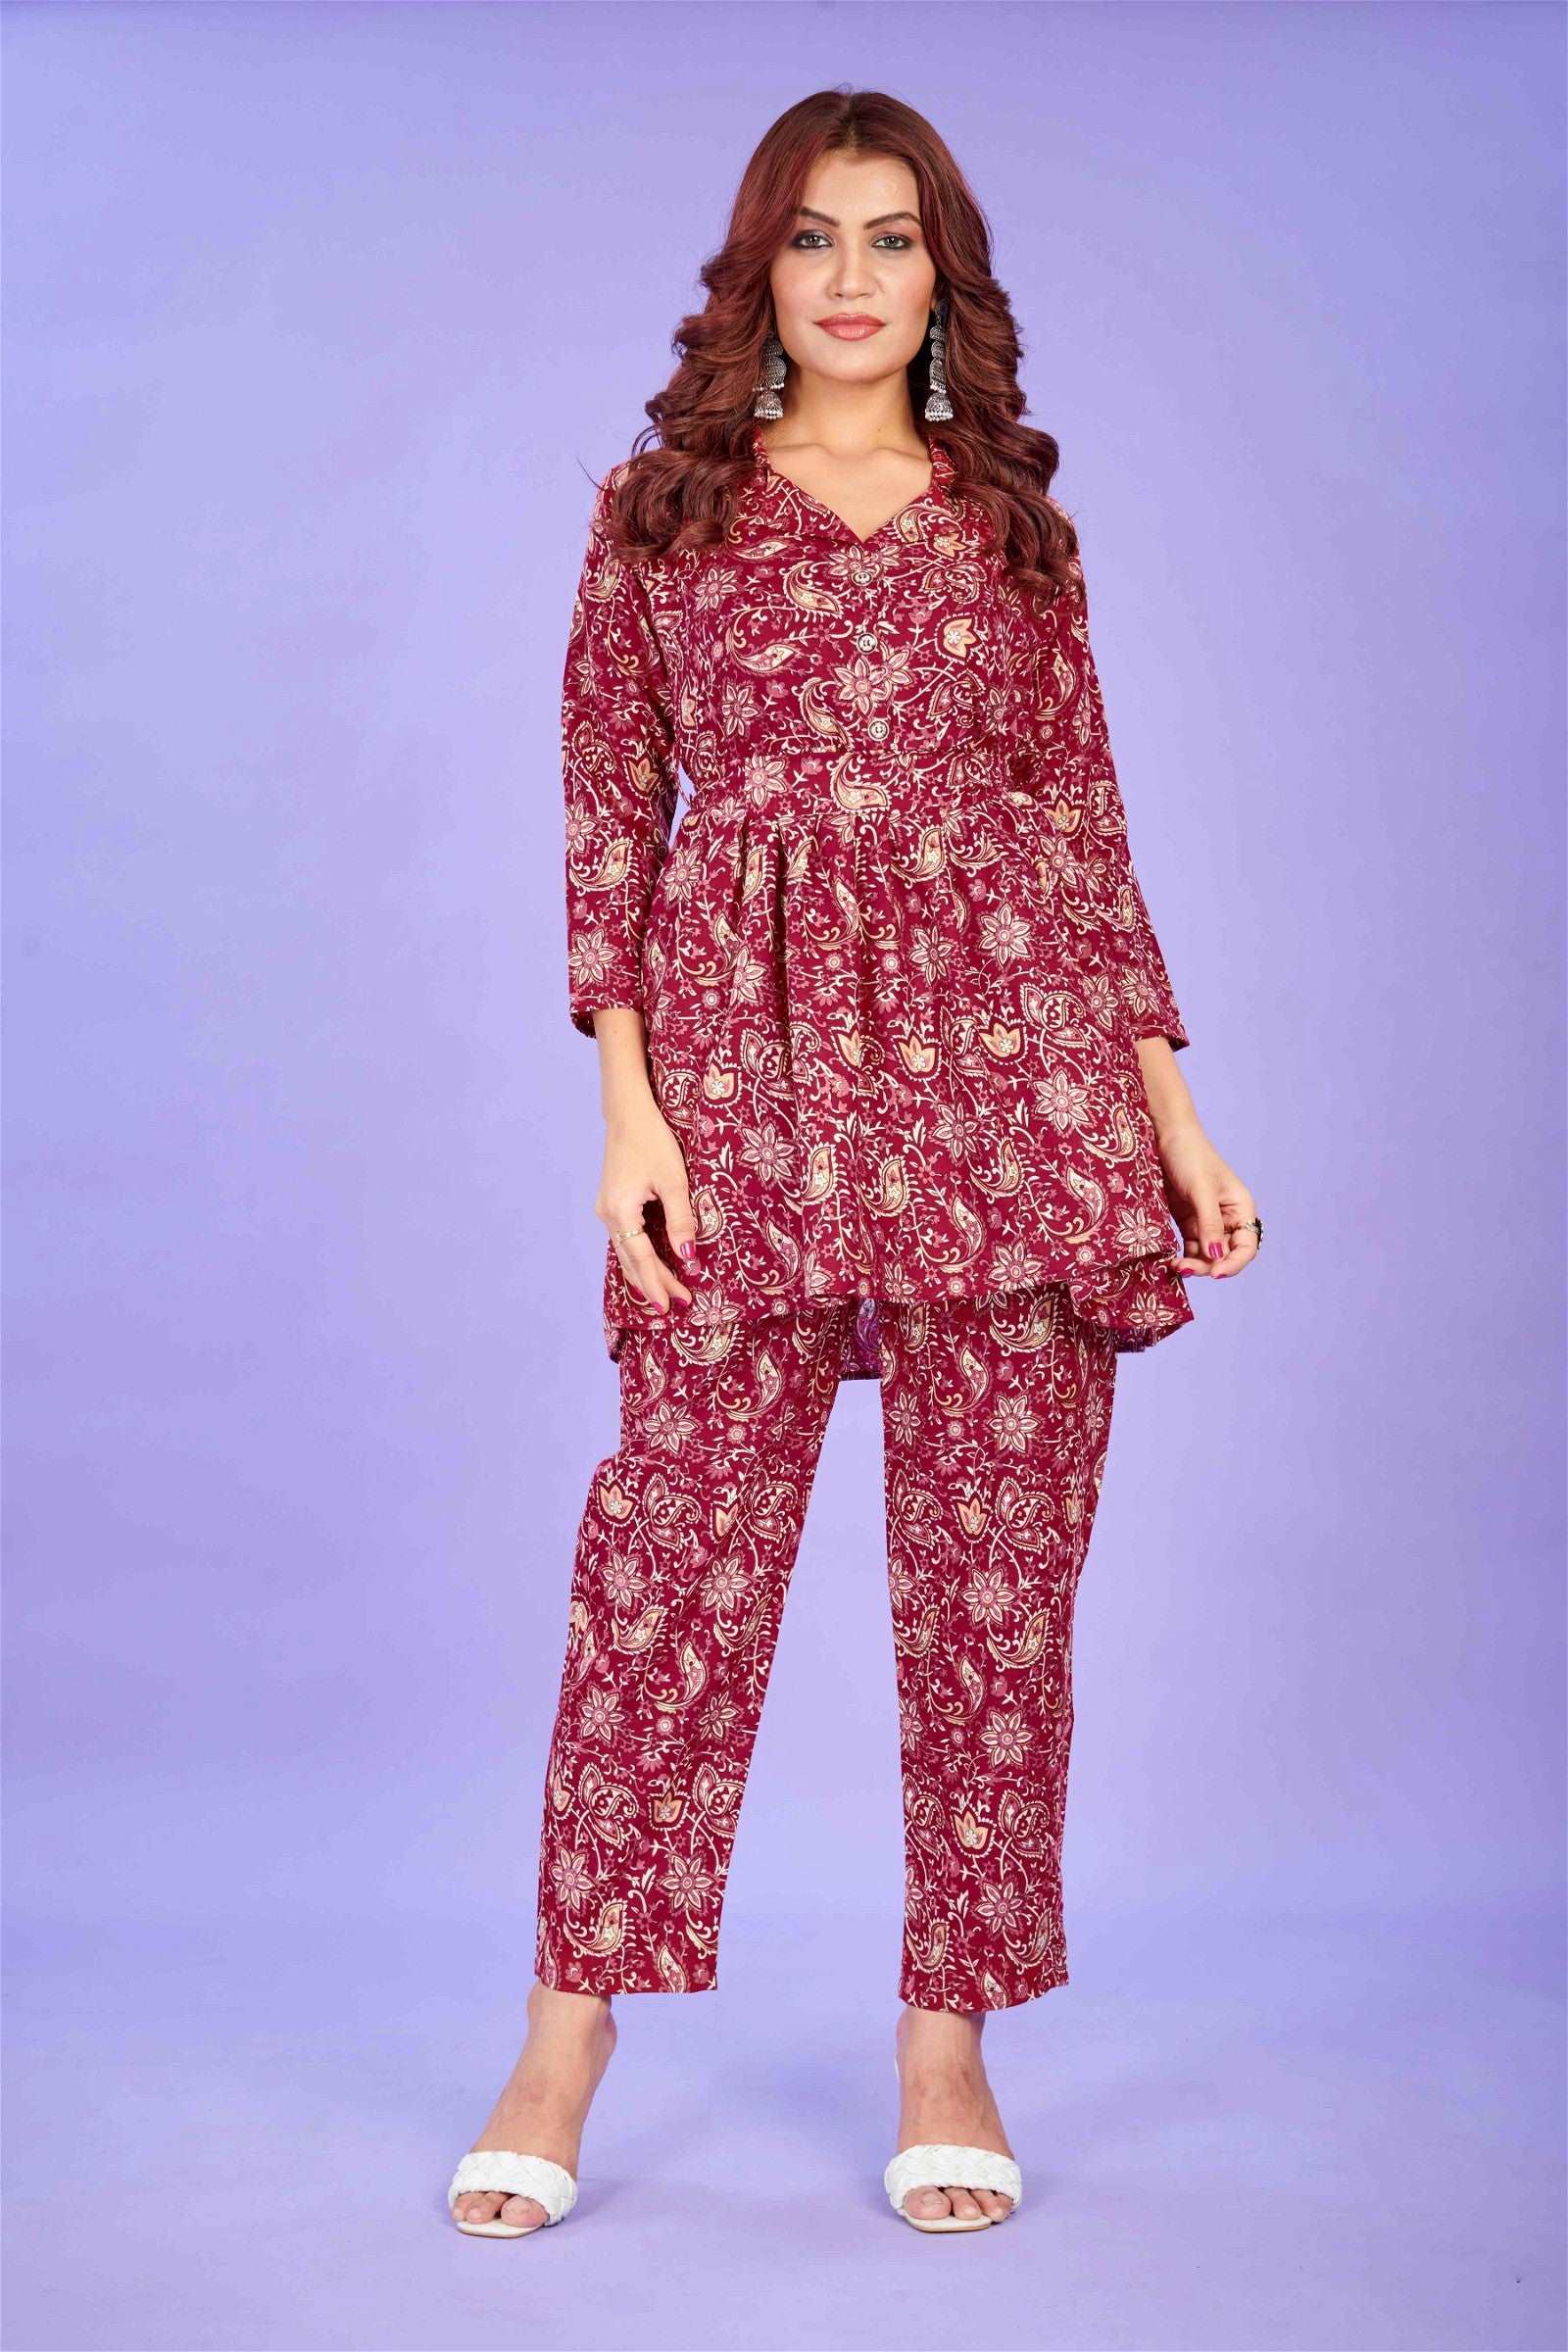 The model in the image is wearing Maroon Cotton Party Wear Co-ords Set from Alice Milan. Crafted with the finest materials and impeccable attention to detail, the  looks premium, trendy, luxurious and offers unparalleled comfort. It’s a perfect clothing option for loungewear, resort wear, party wear or for an airport look. The woman in the image looks happy, and confident with her style statement putting a happy smile on her face.